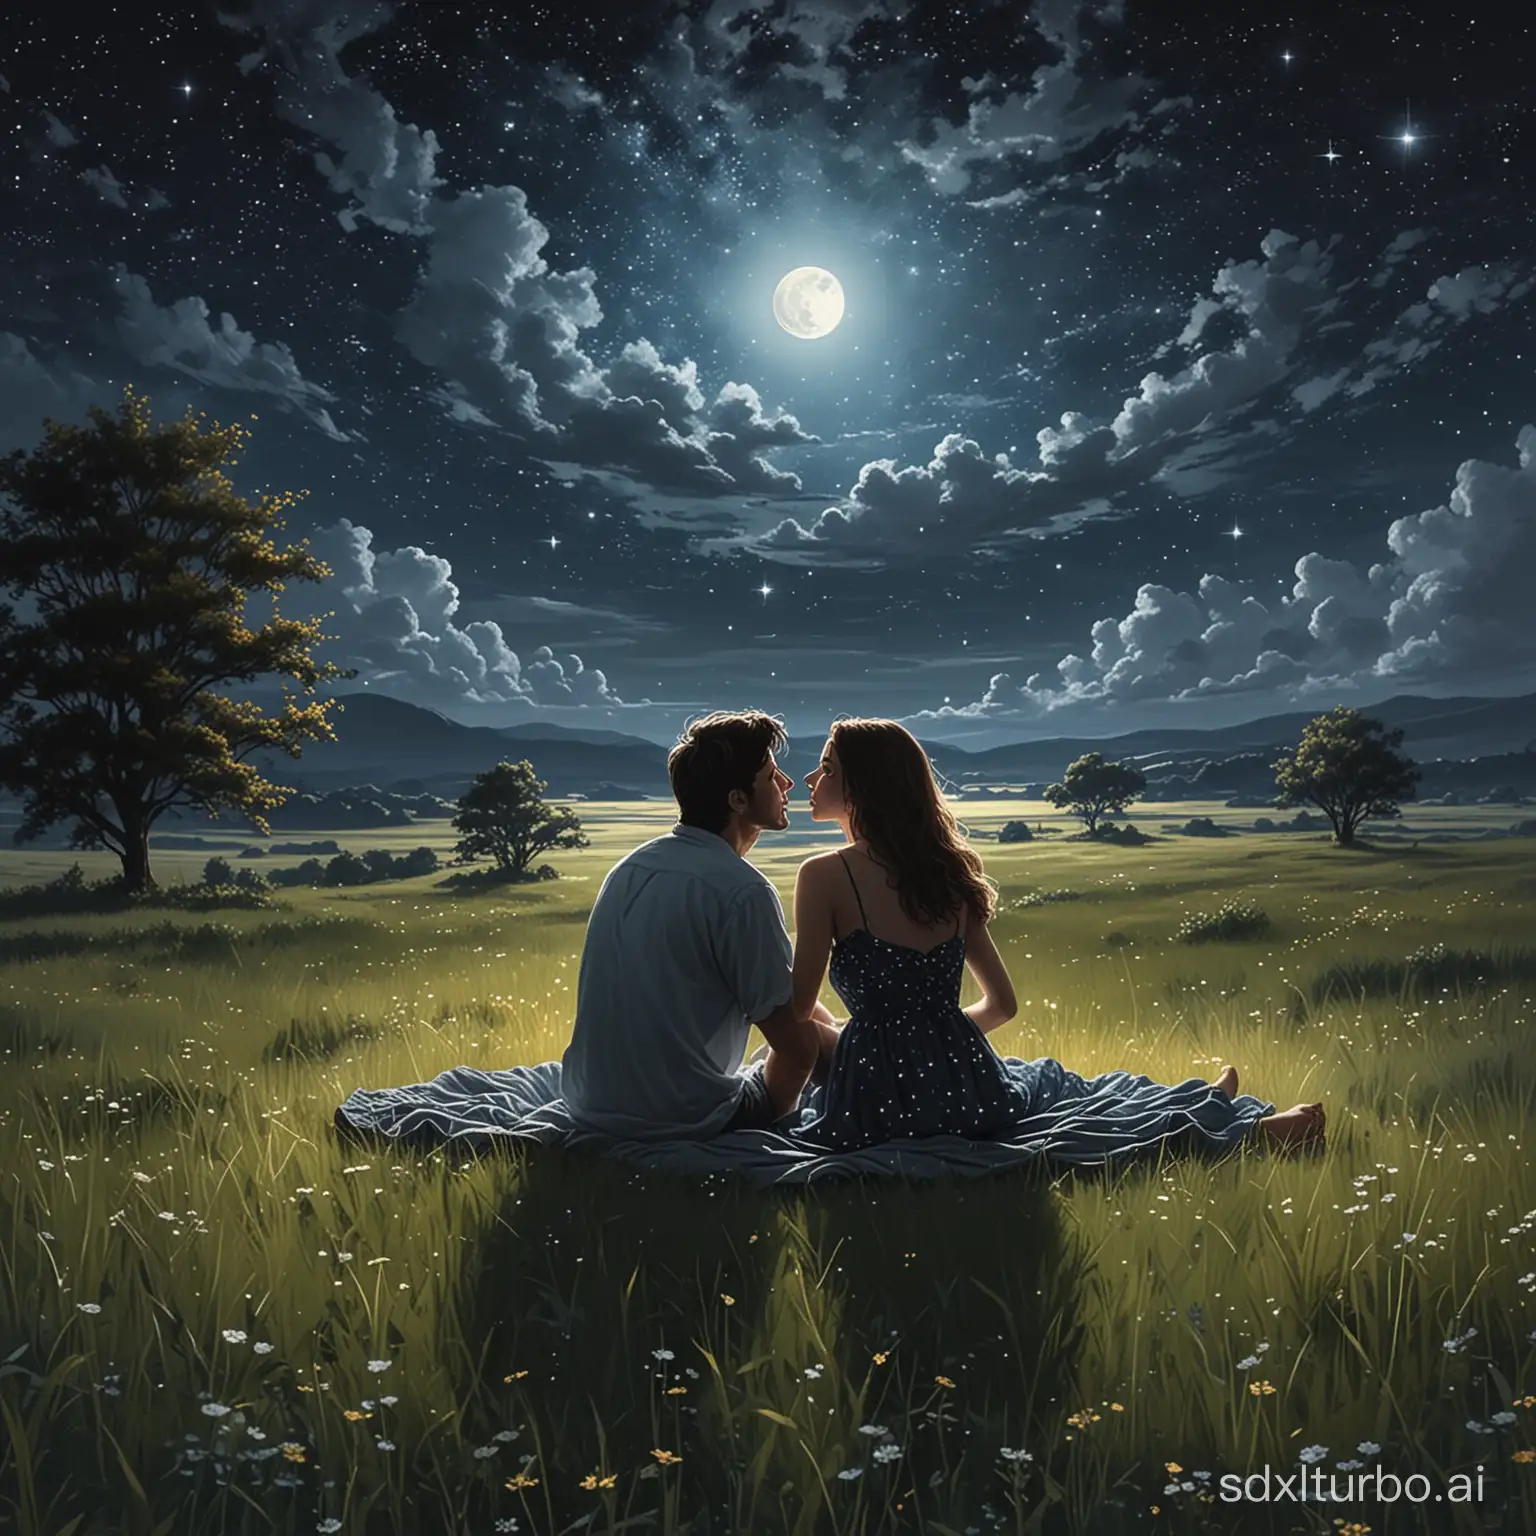 Lovers kiss on a dazzling night under the stars, sitting on a tranquil grassland, surrounded by peace, with only the stars and the moon as their witnesses.